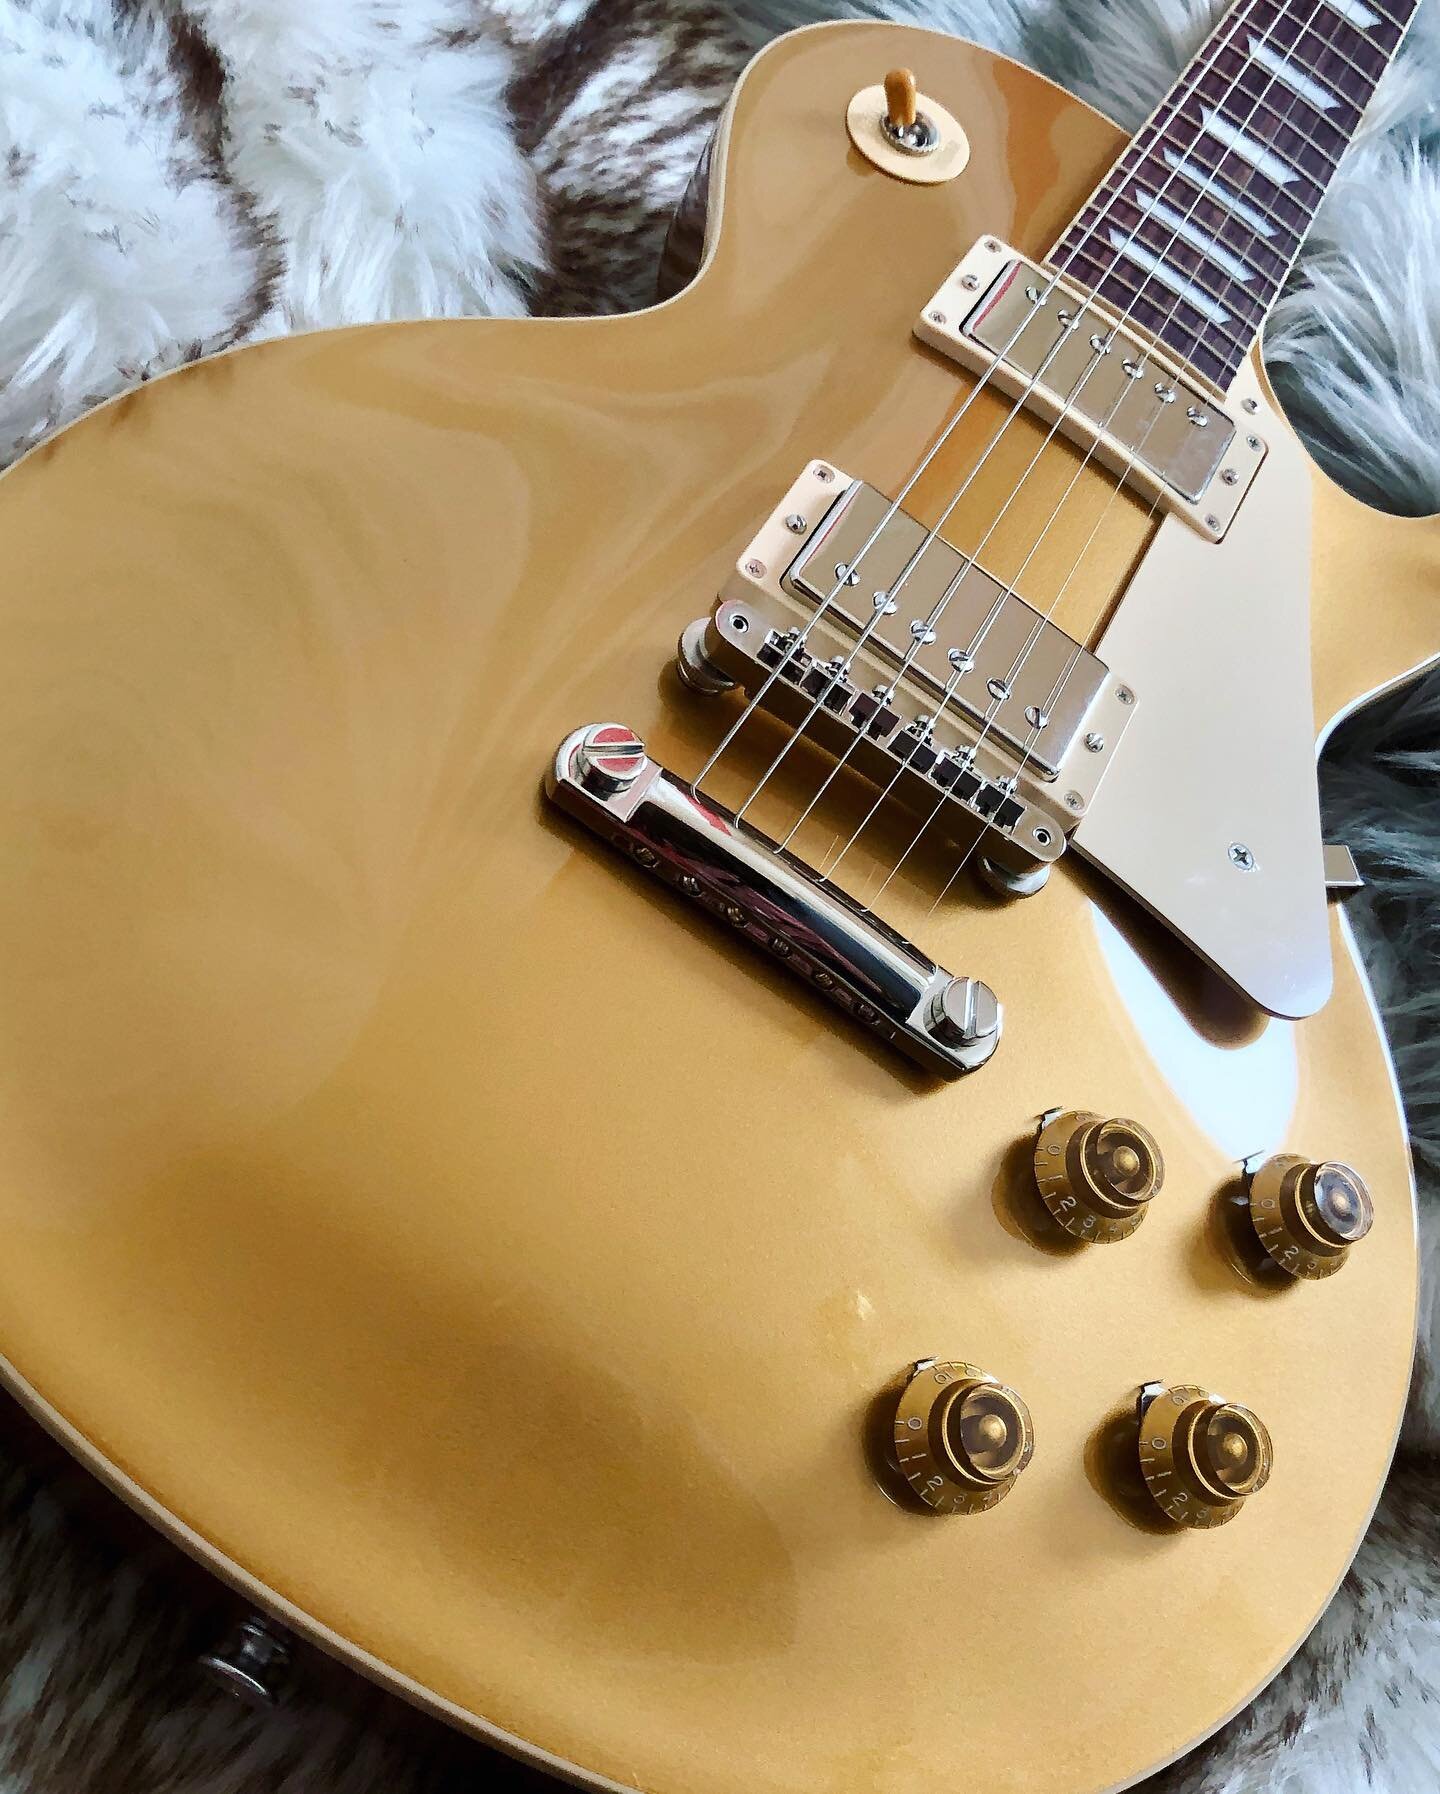 Do ya like Gold?! From its carved maple top to its stockpile of premium features, the Gibson Les Paul Standard &rsquo;50s is ready to rock. Burstbucker pickups and handwired electronics deliver a massive tone arsenal. Enjoy effortless playability cou